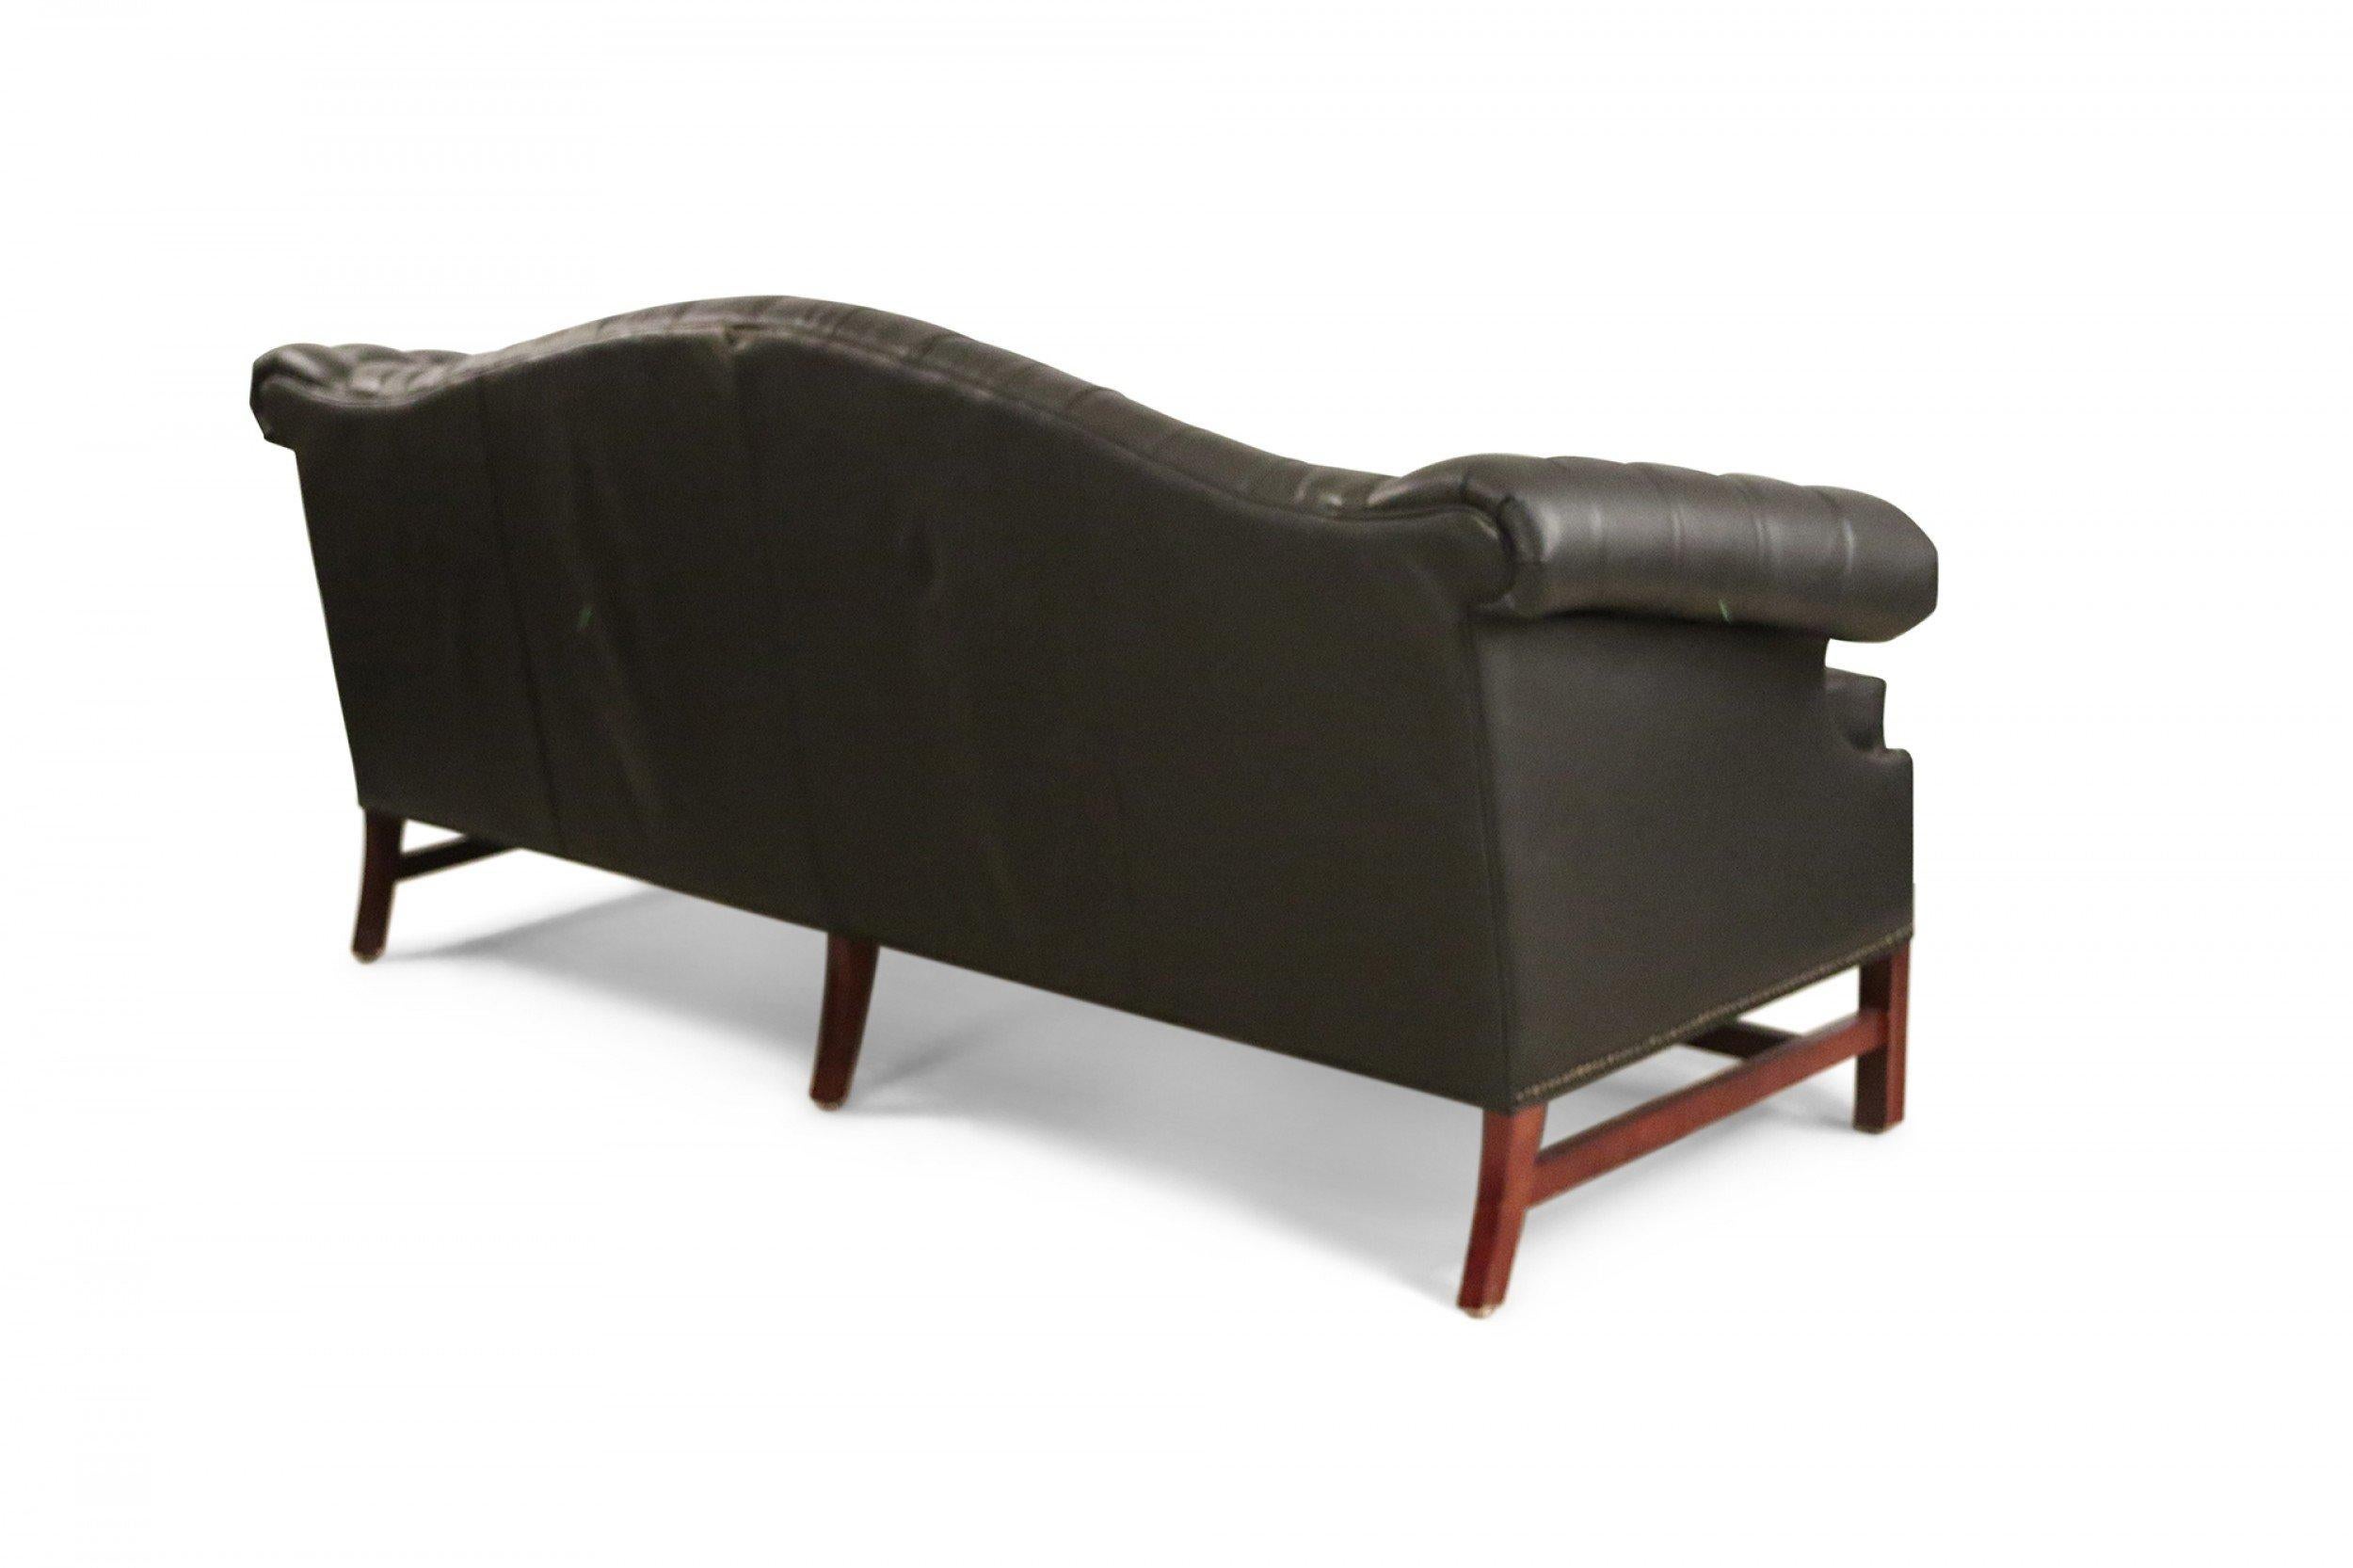 English Victorian-style (20th Century) three-seat camel back design sofa with black button tufted faux-leather upholstery and brass nail head detail with a wooden stretcher and legs, and a single seat cushion.
 